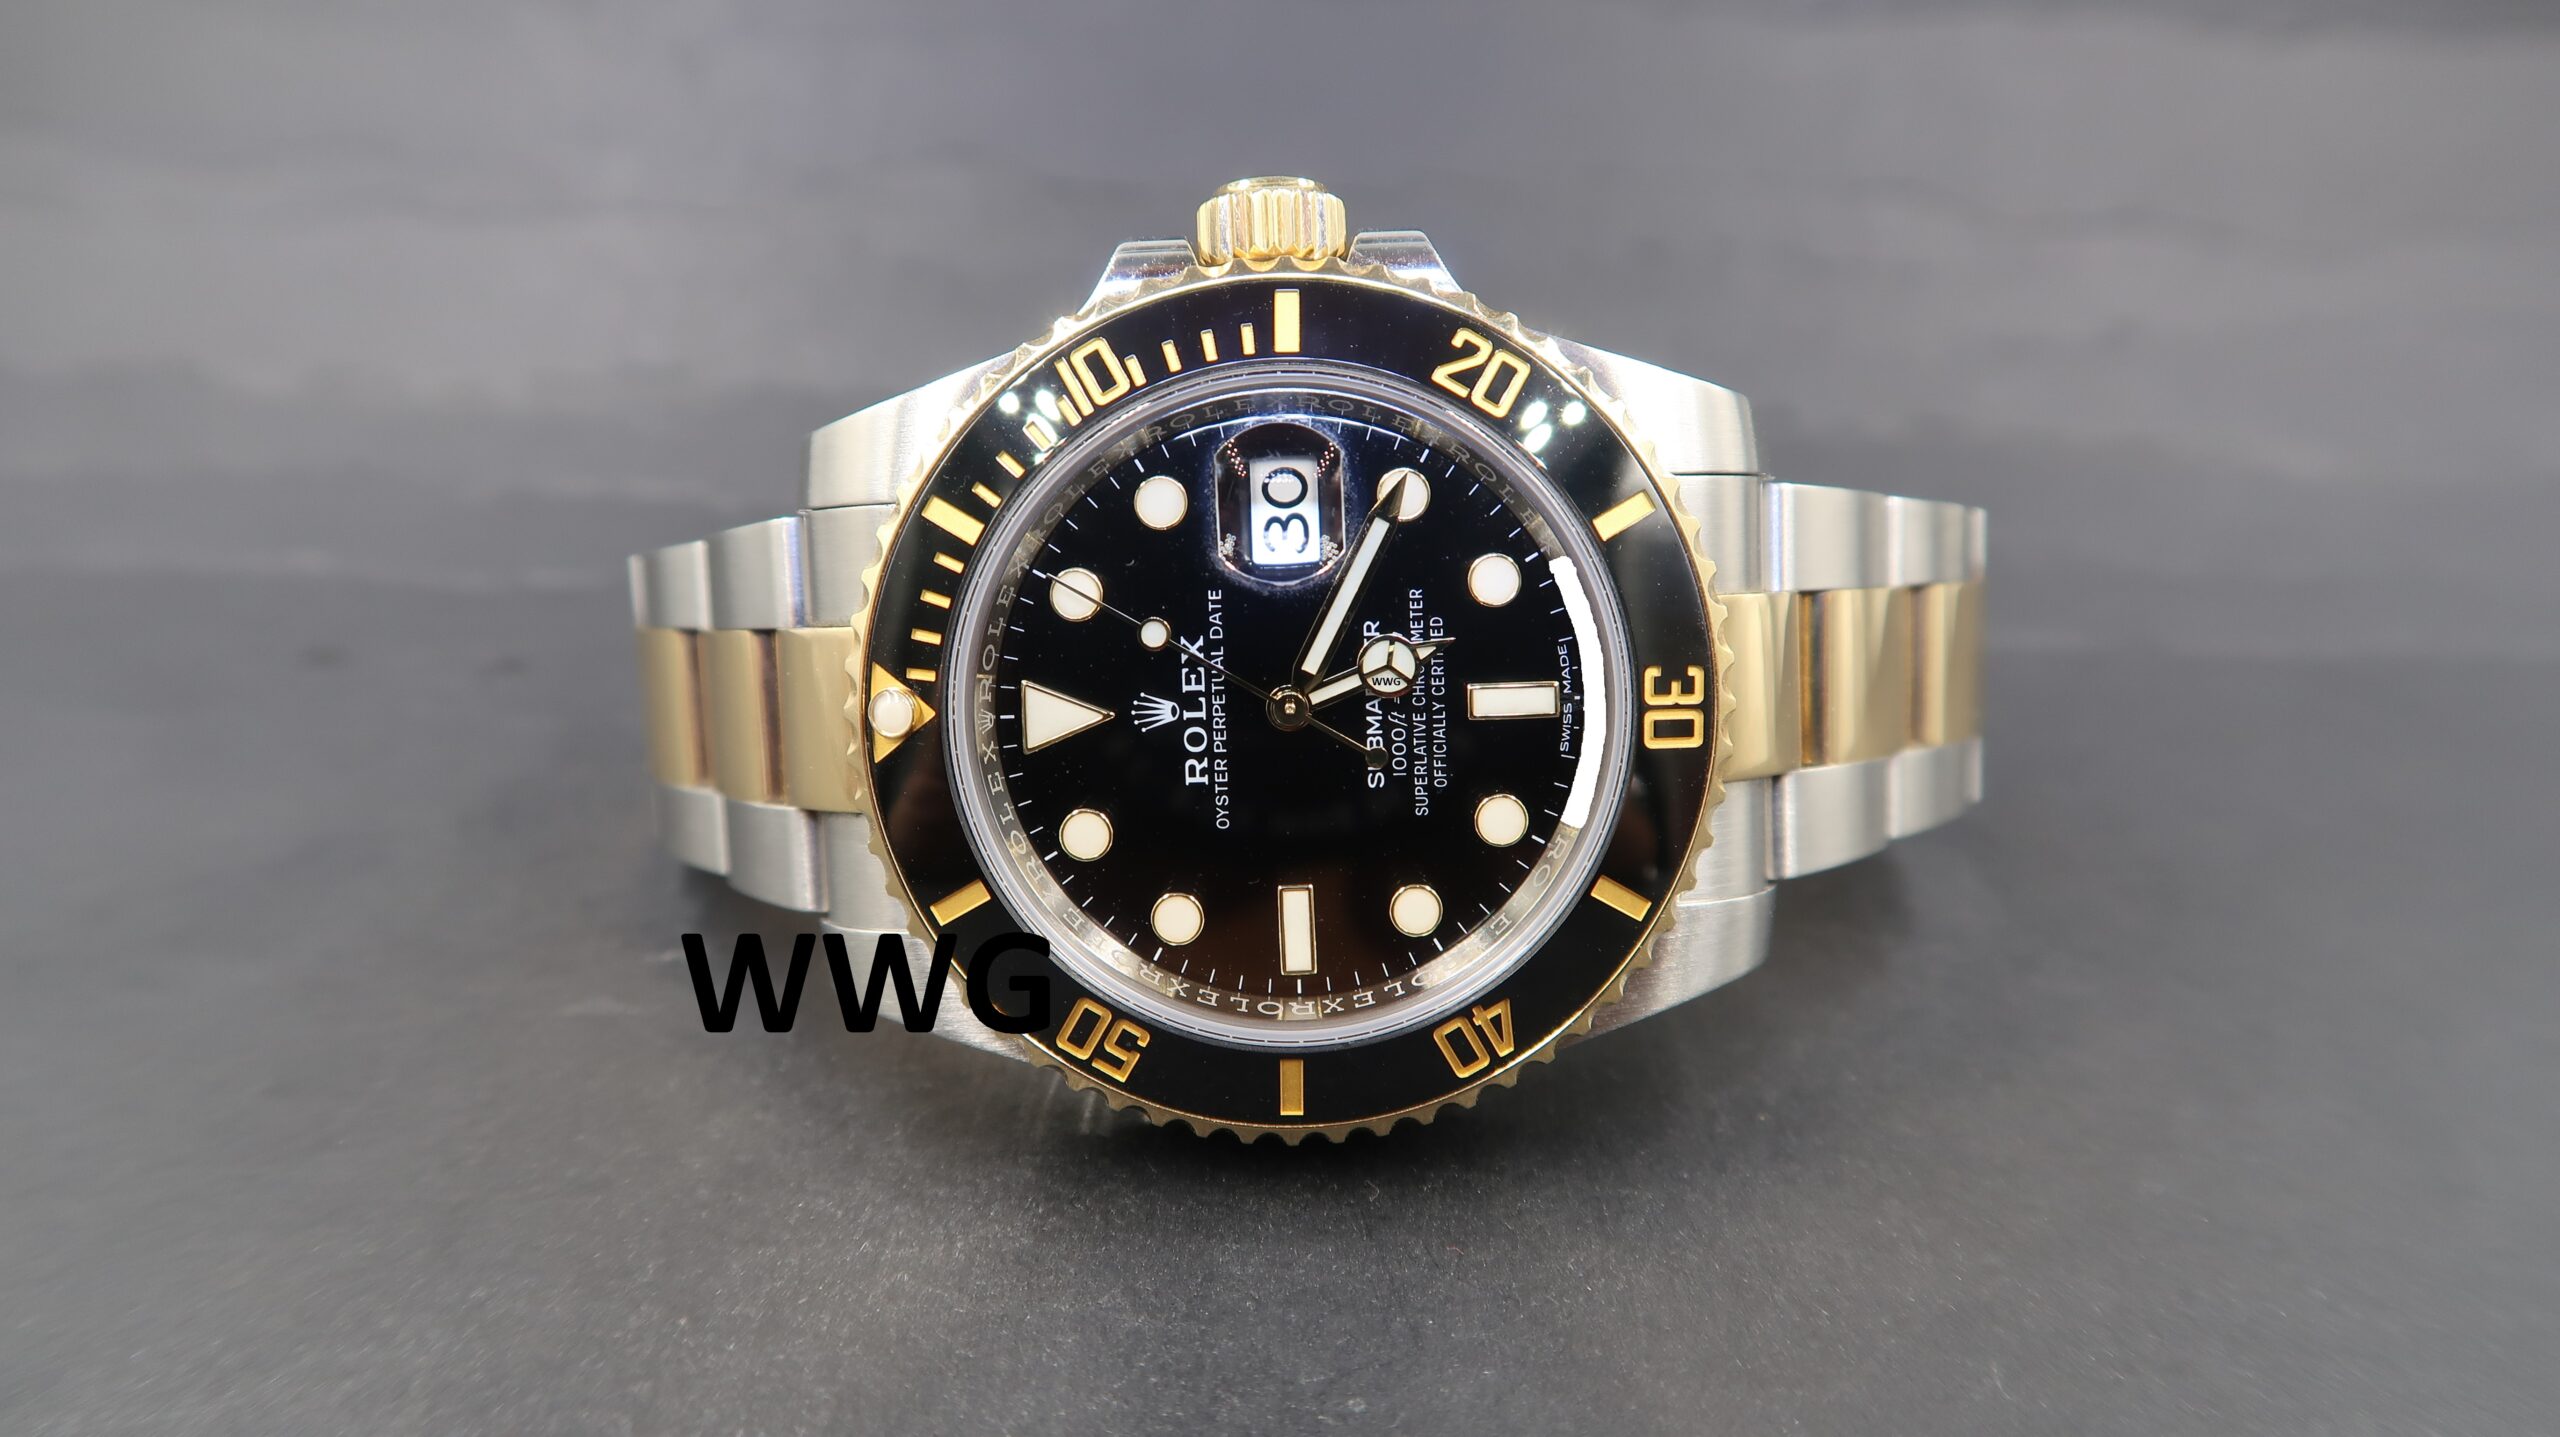 Rolex watch price in malaysia 2021